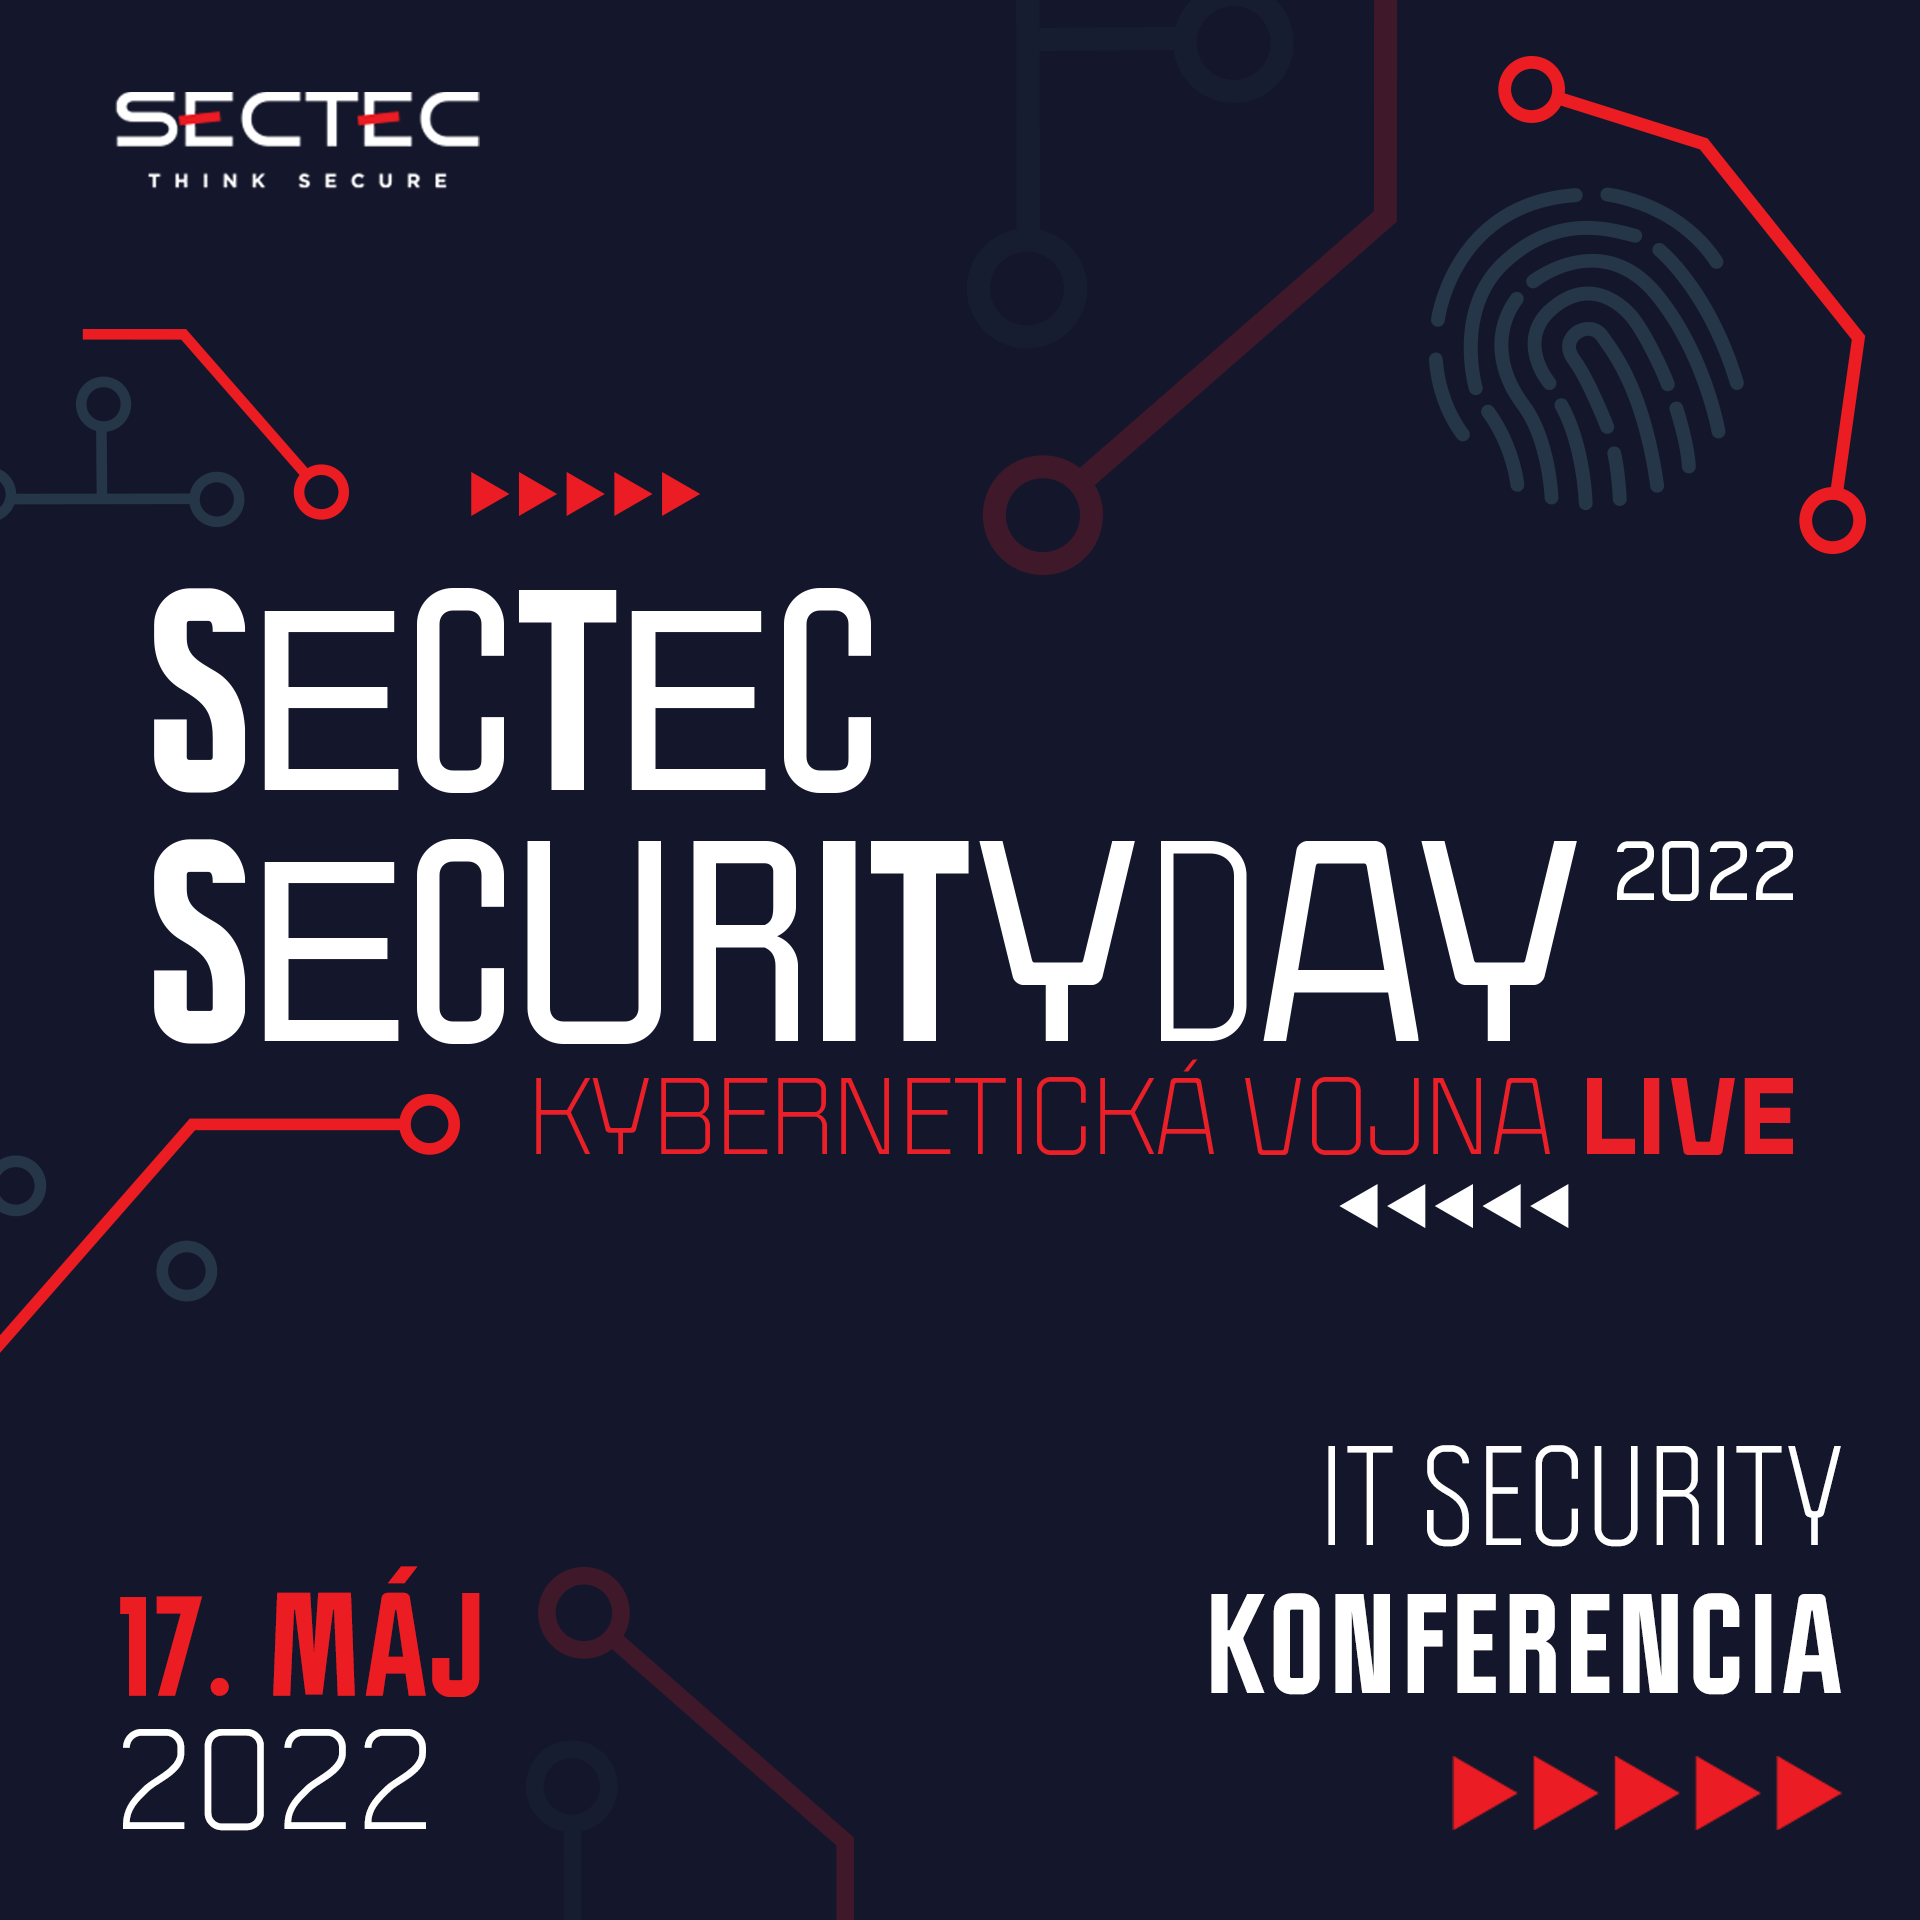 SecTec Security Day 2022